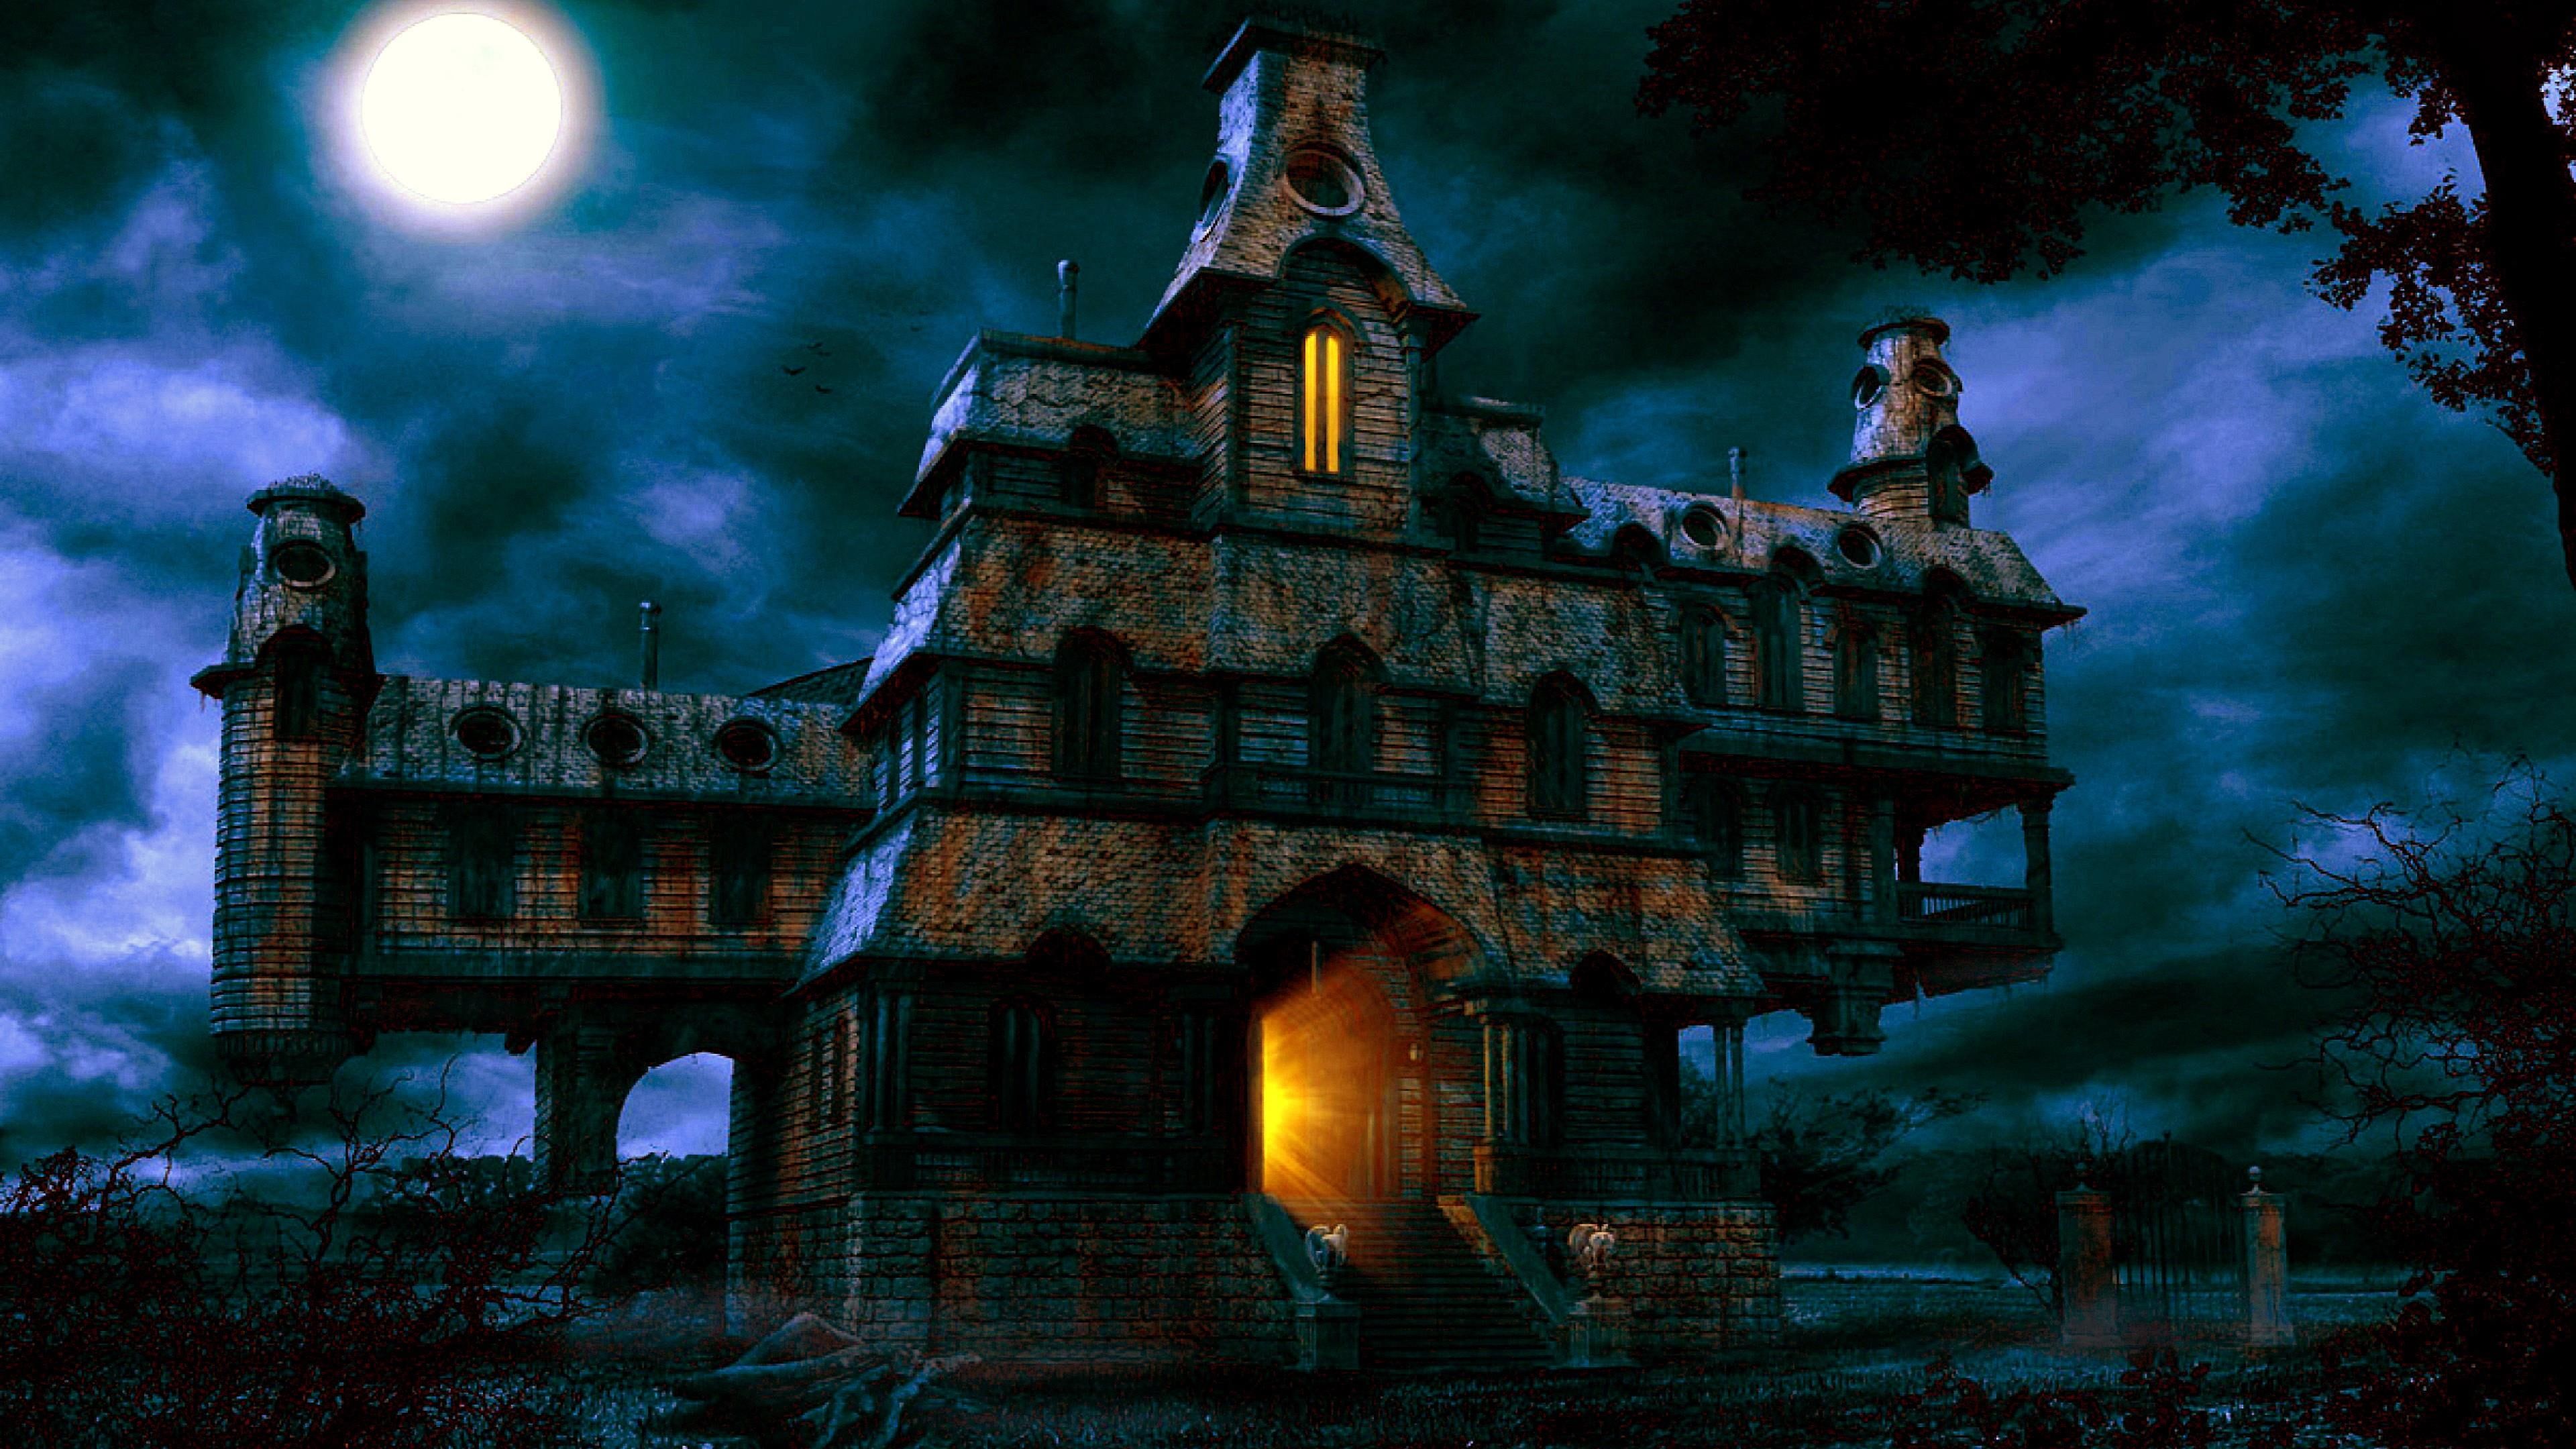 HD wallpaper: haunted house, creepy, halloween, full moon, moonlight, night. Haunted mansion, Mansions, Ghost house